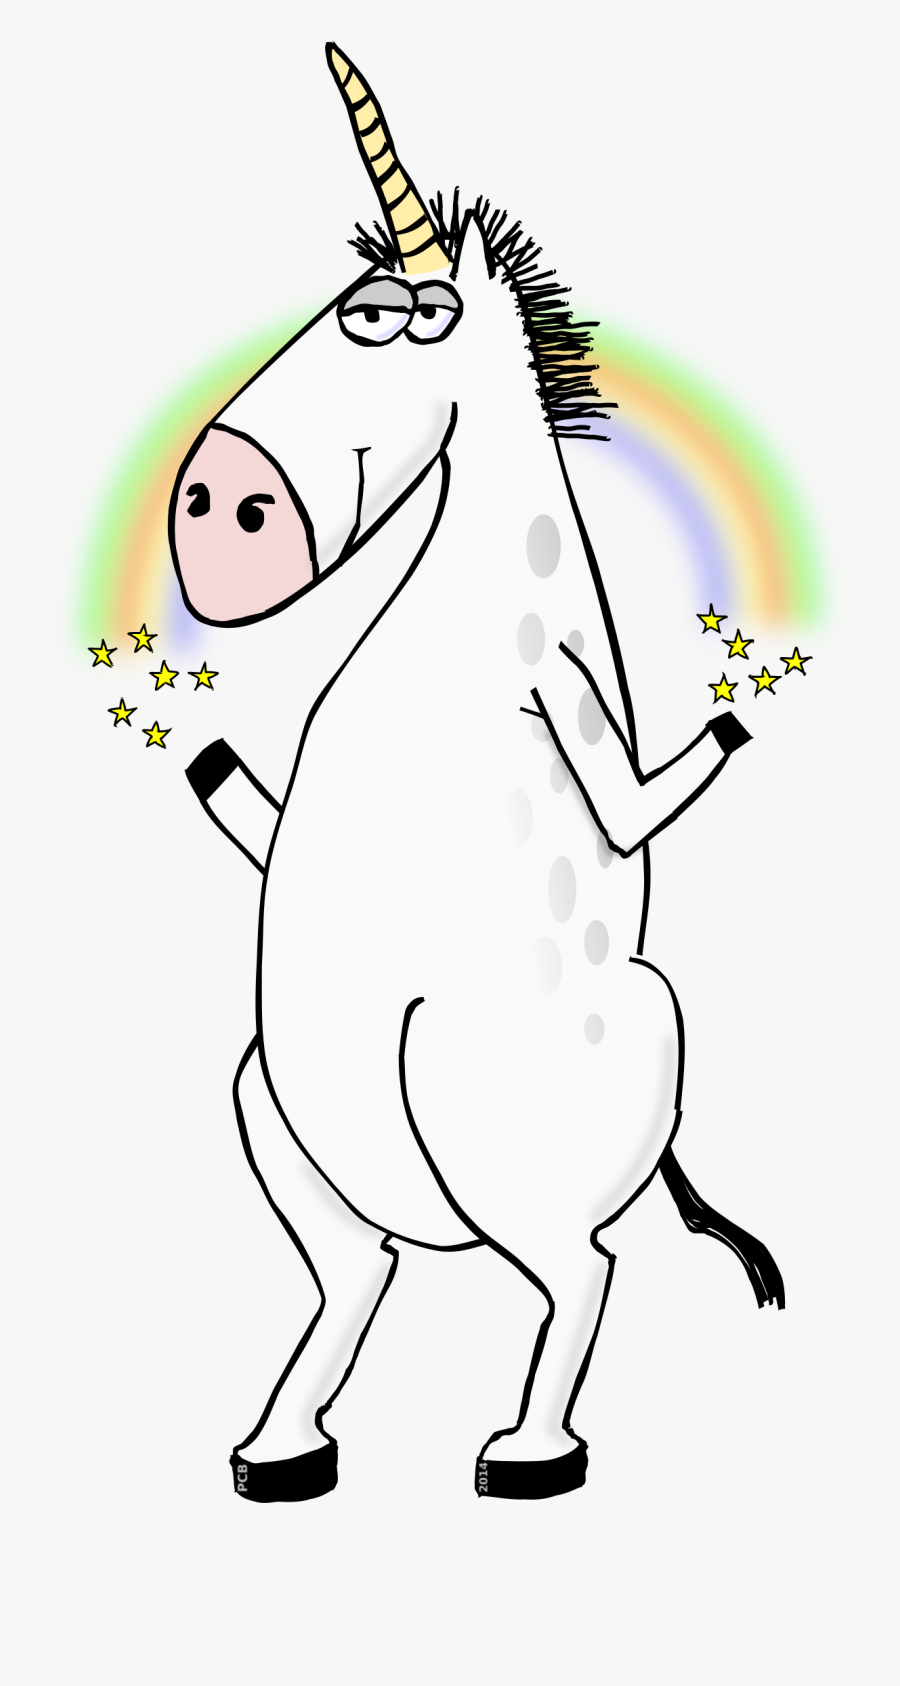 Unicorn Free To Use Clipart - Cartoon Unicorn Standing Up, Transparent Clipart